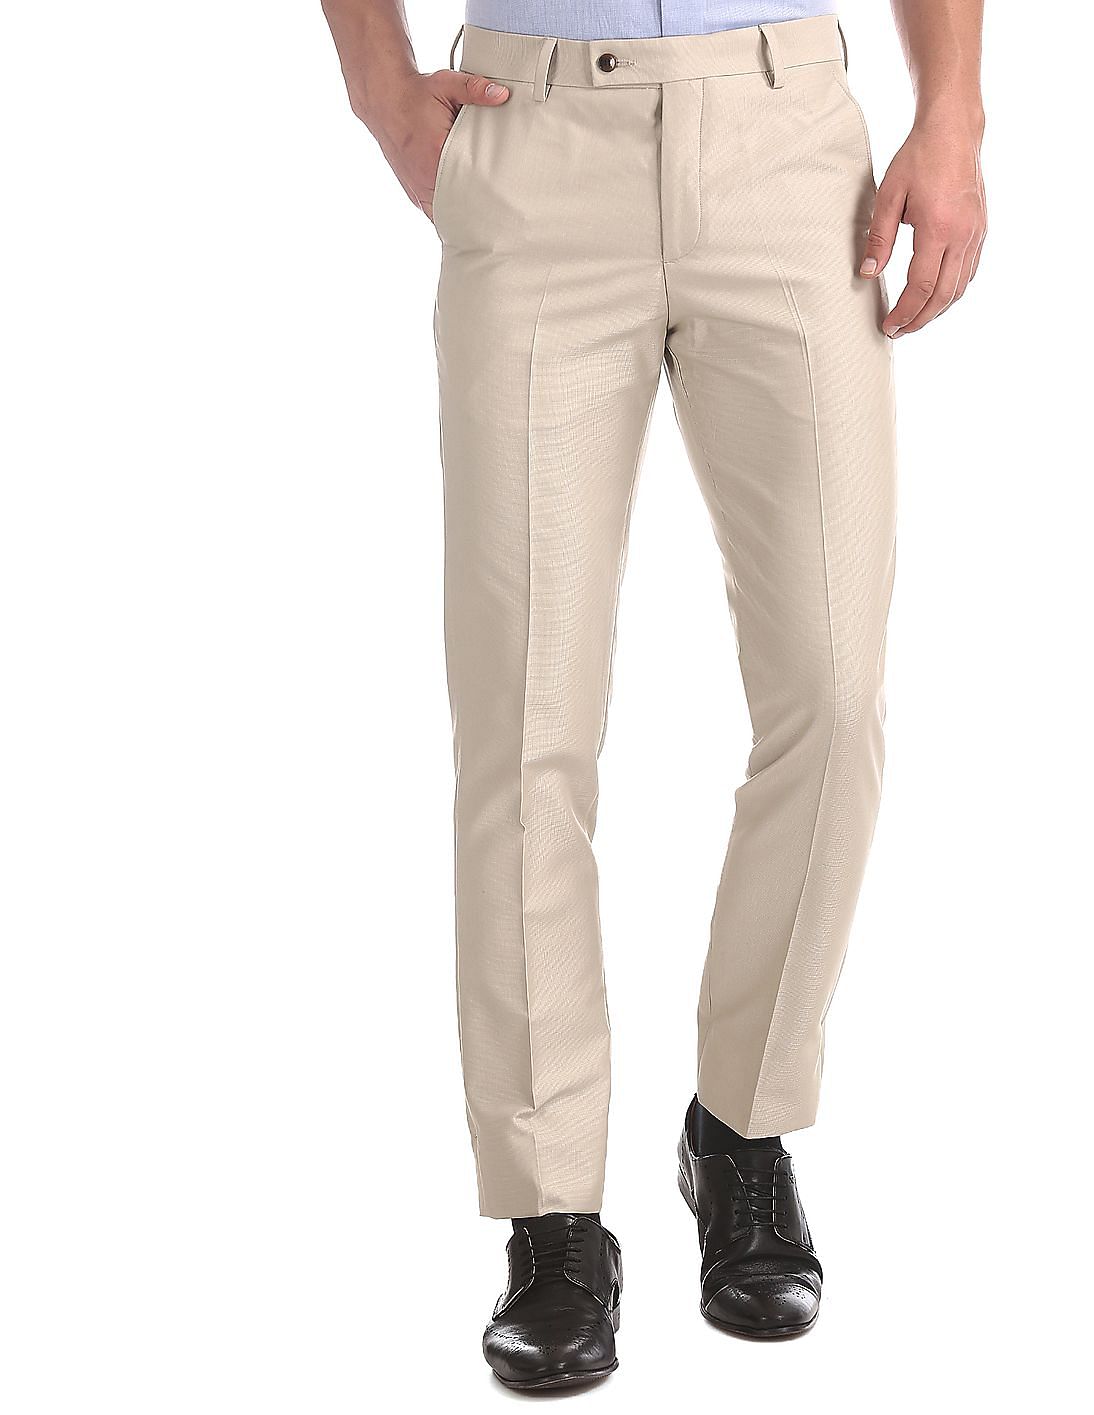 Buy Men Beige Mid Waist Solid Trousers online at NNNOW.com